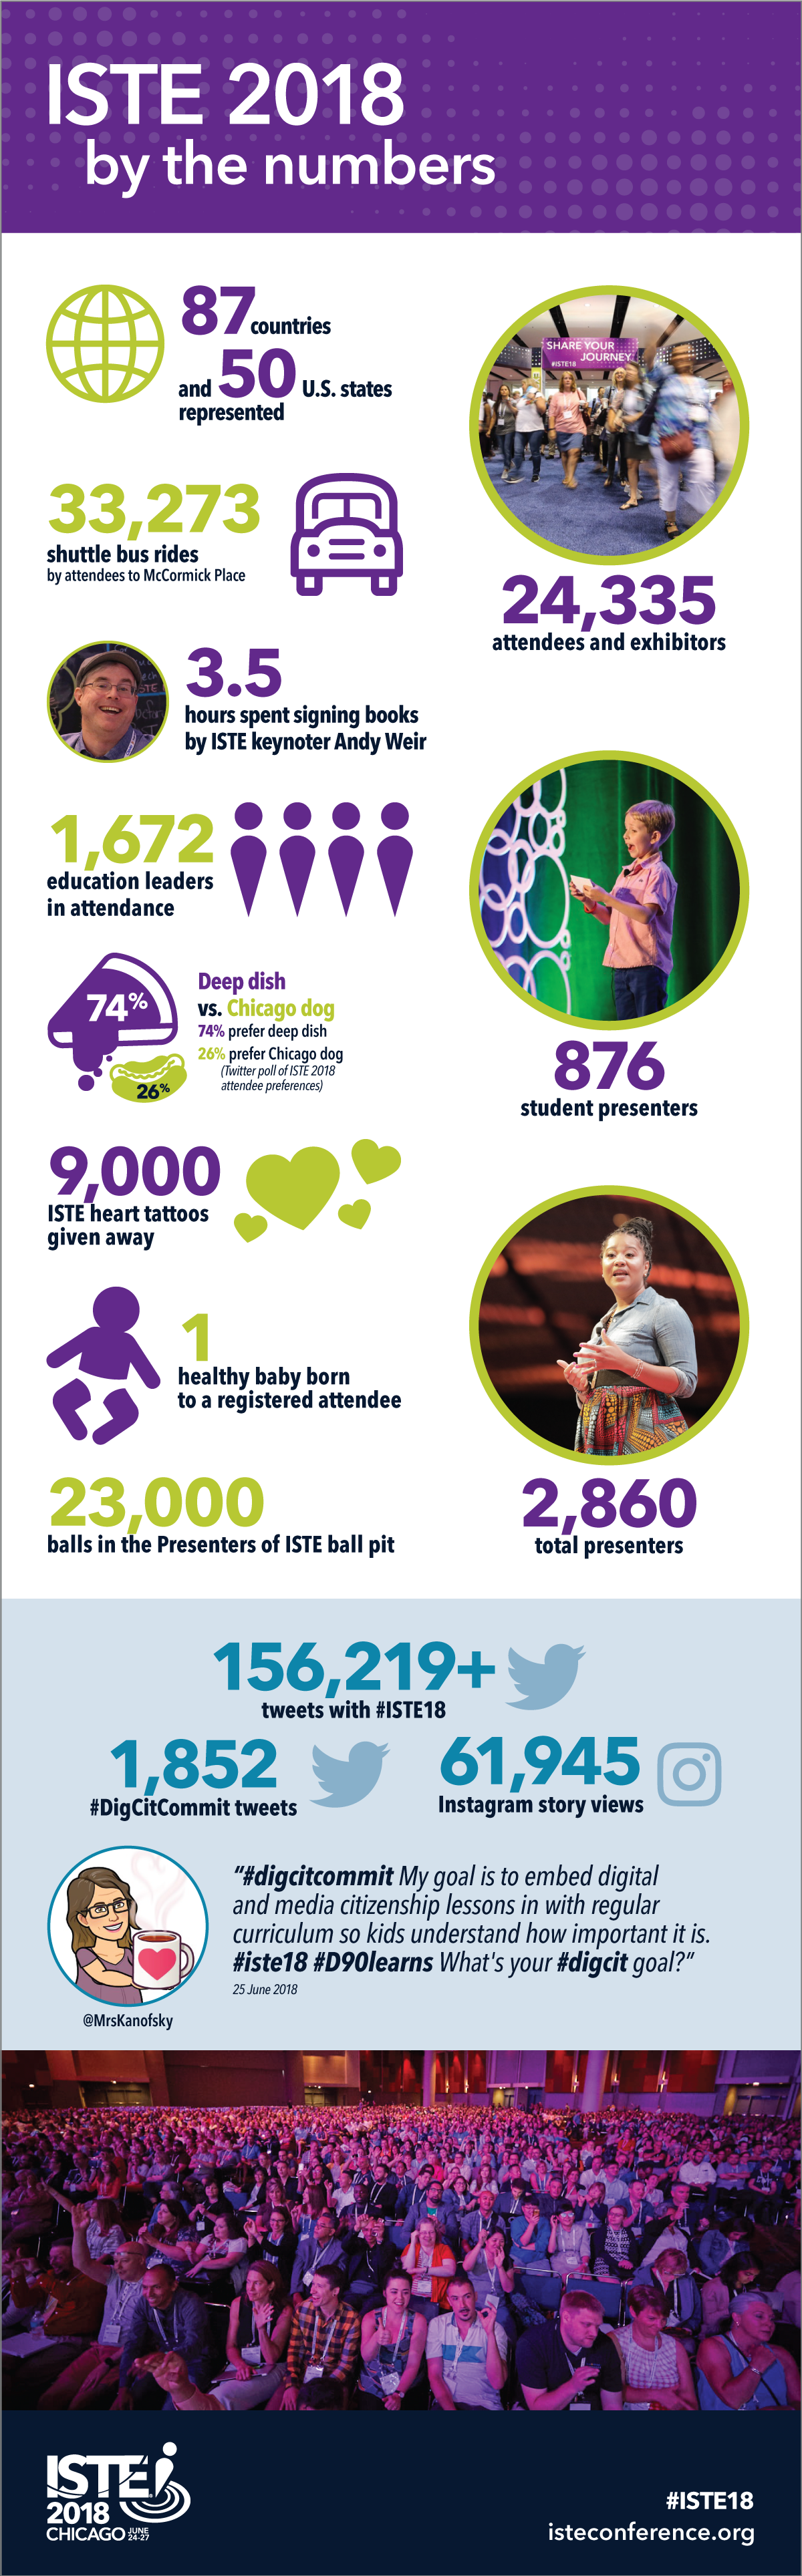 iste-2018-by-the-numbers